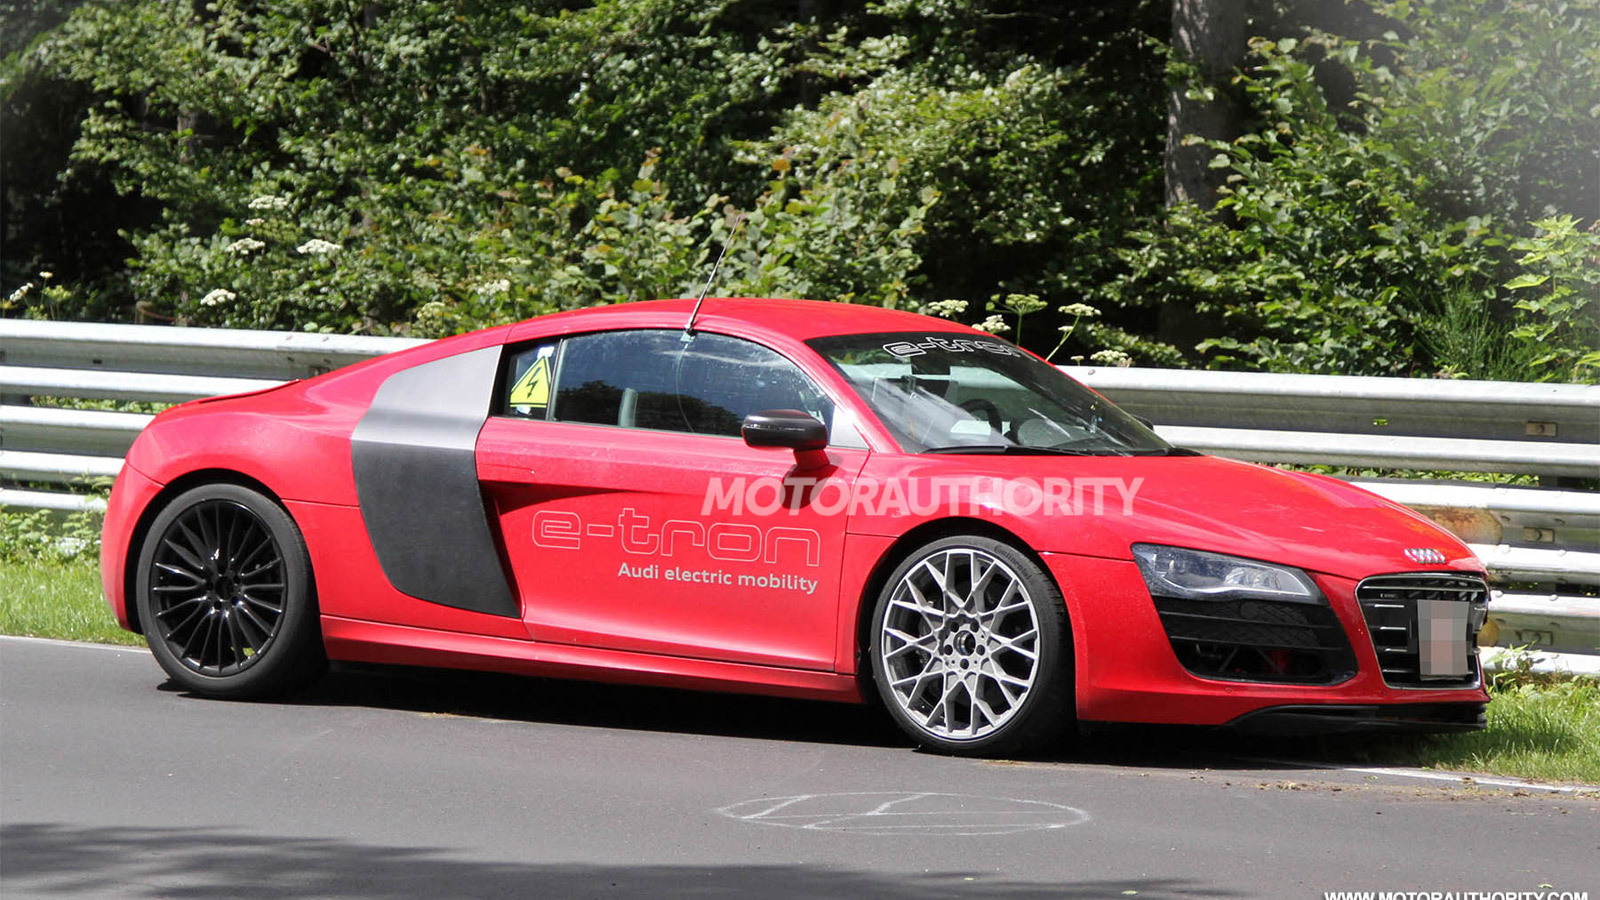 2013 Audi R8 e-tron that crashed at the Nürburgring in July 2012